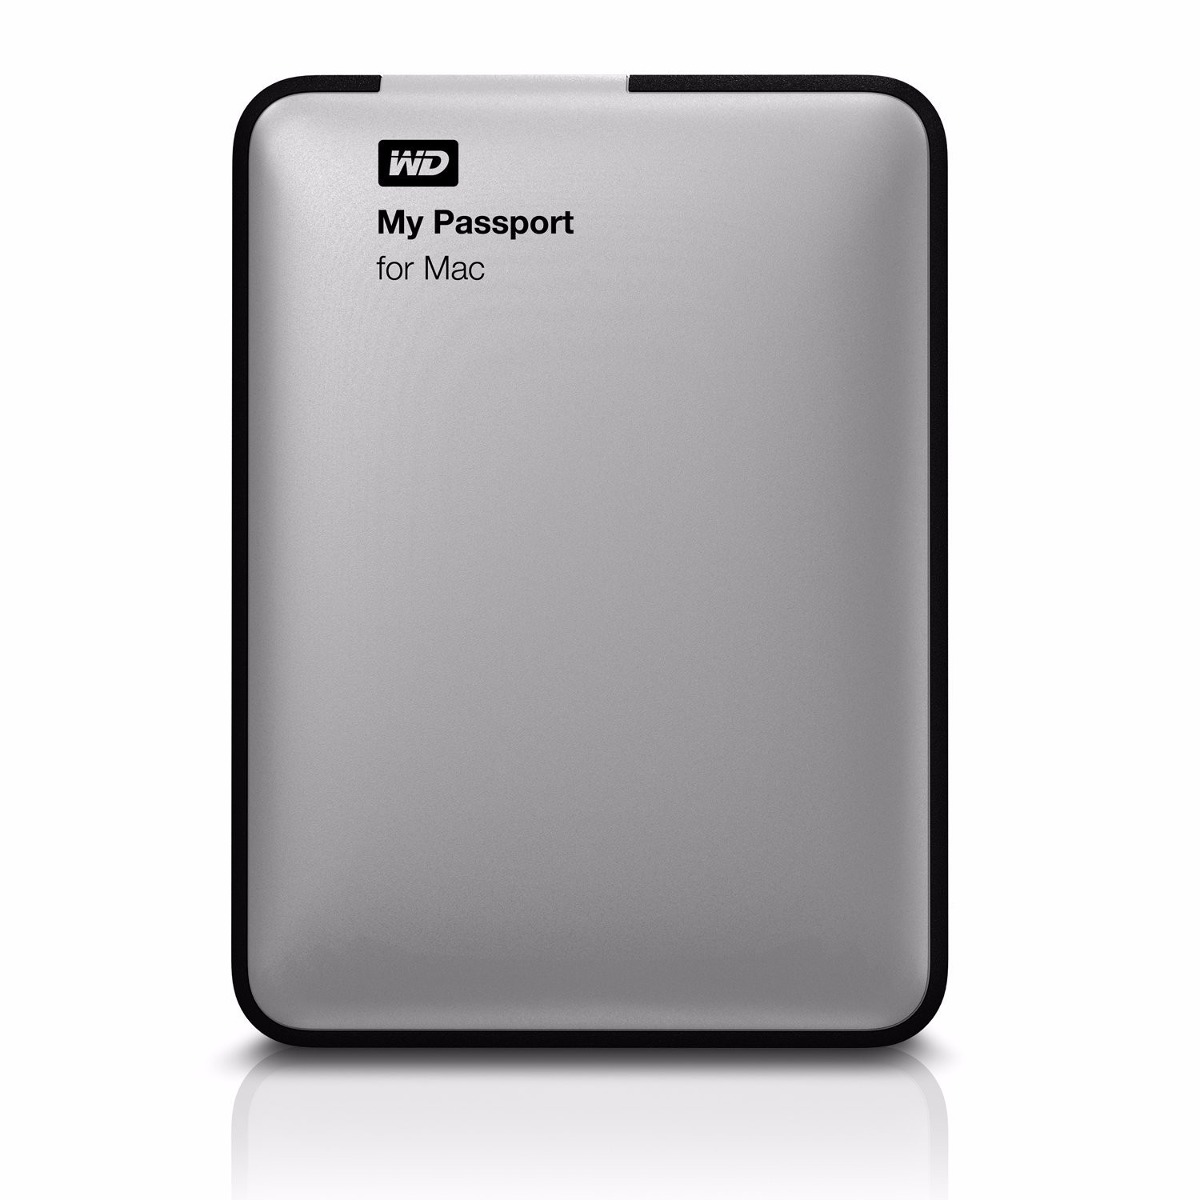 what is my passport for mac